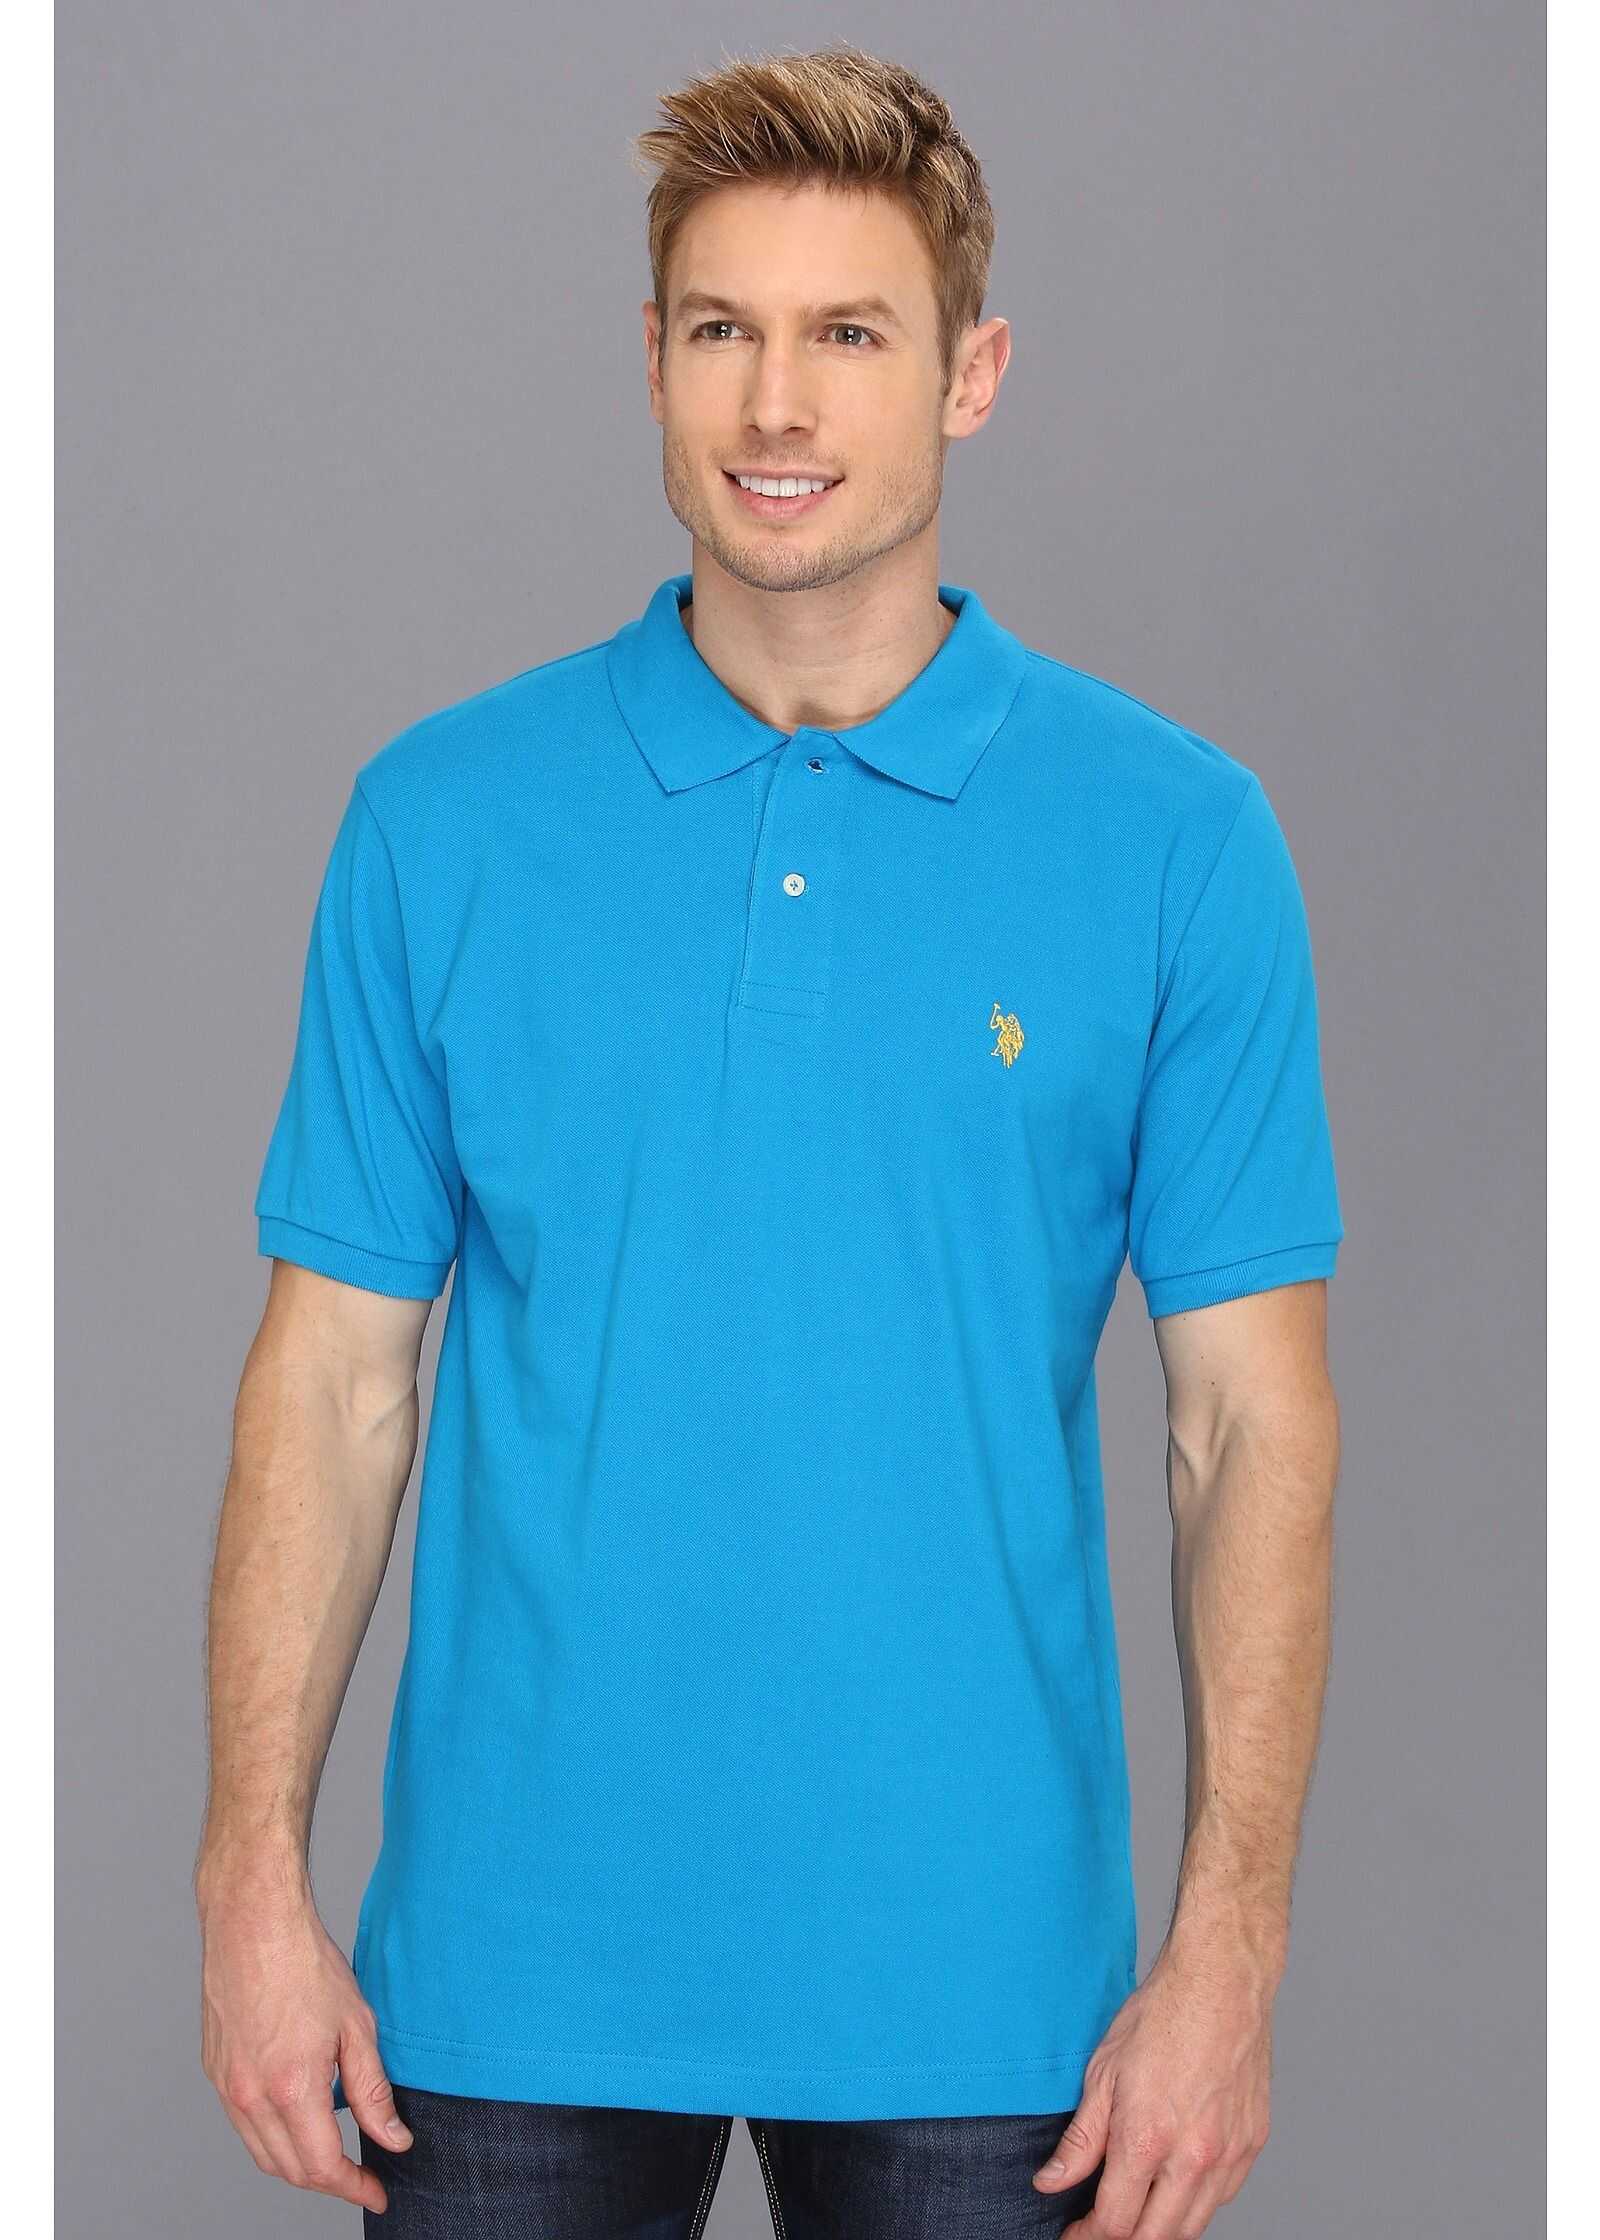 U.S. POLO ASSN. Solid Cotton Pique Polo with Small Pony Teal Blue 1